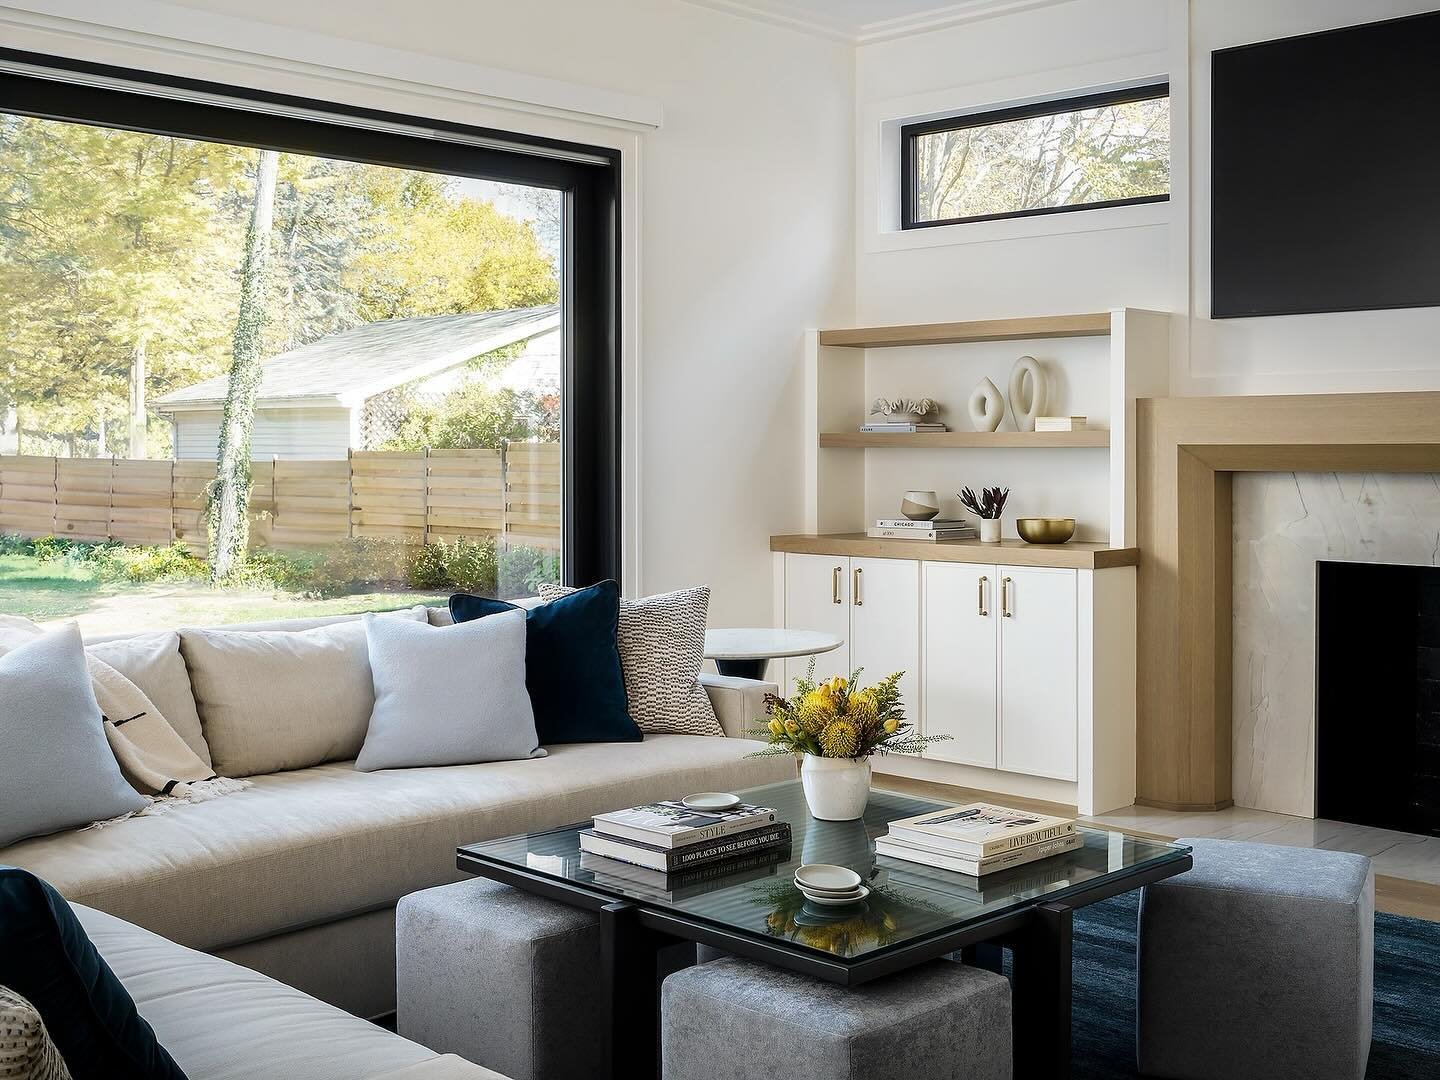 Loving the light-filled corner at this new construction project in Wilmette! The soft color palette creates a relaxing space for the family to grab a seat and gather. 

Photo: @rymcdon

#londonwalderinteriordesign #LWID #moderndesign #chicagodesigner